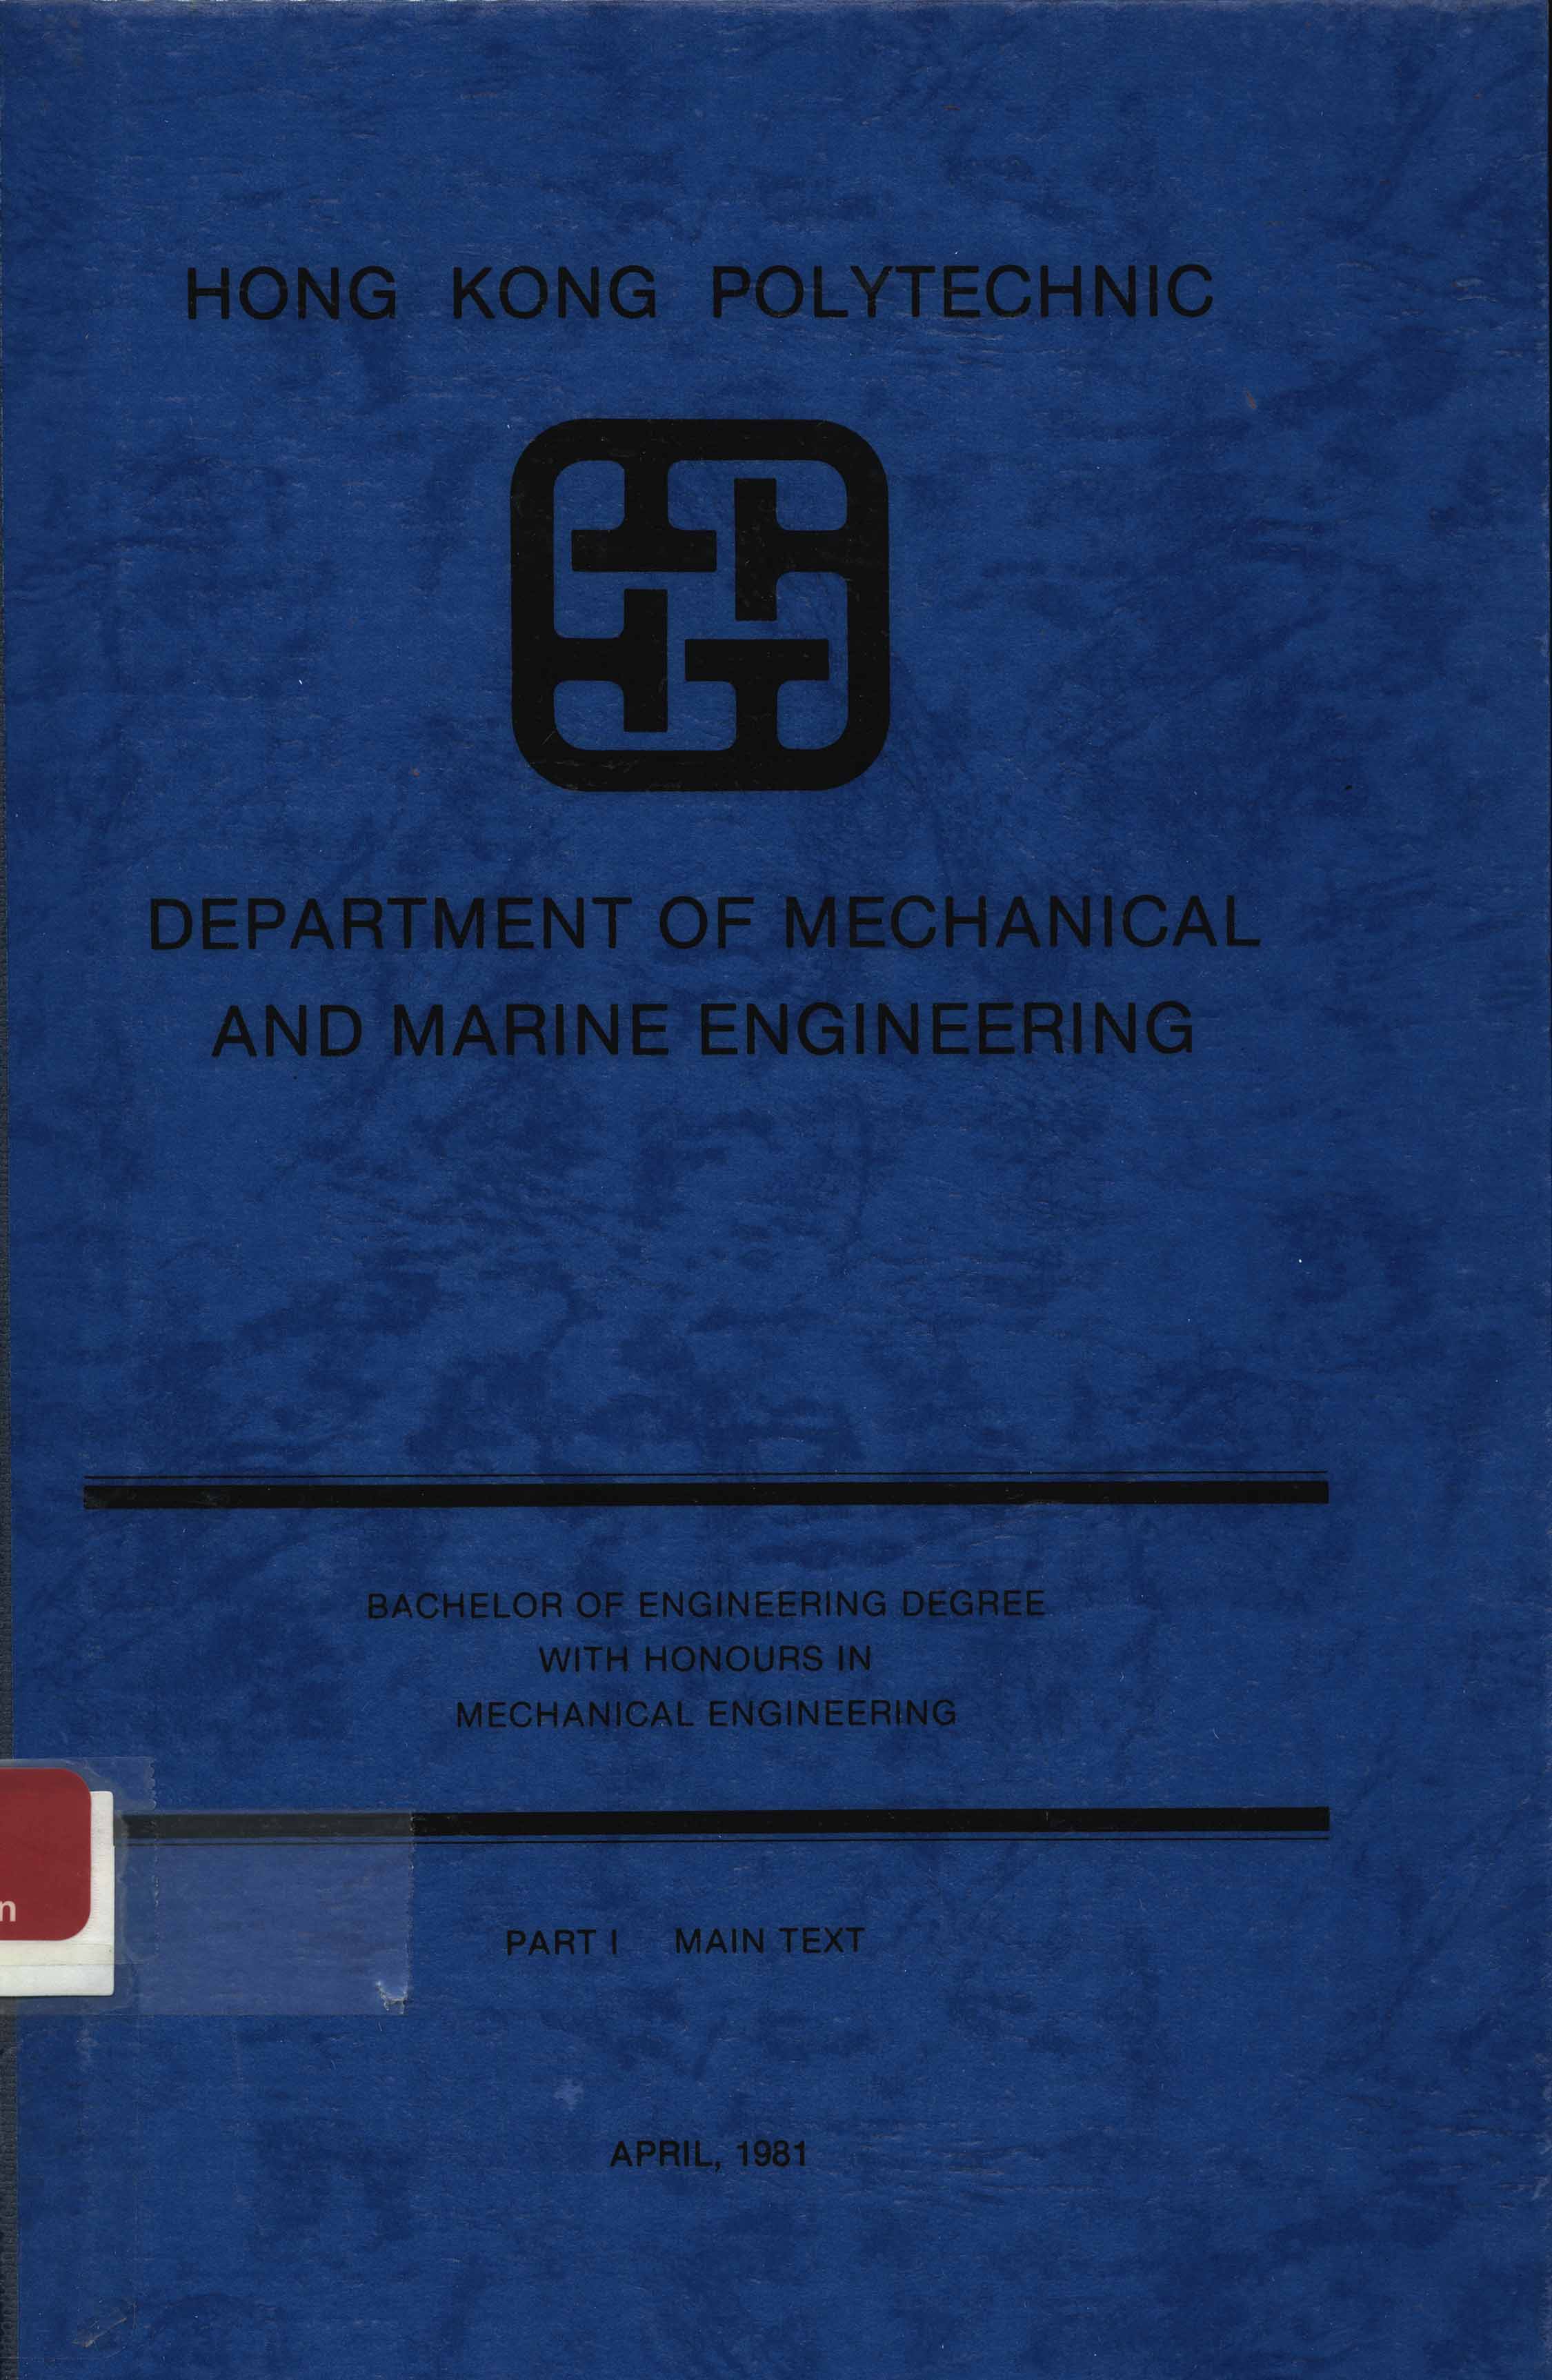 Bachelor of Engineering degree with honours in Mechanical Engineering. Part 1 - Main text